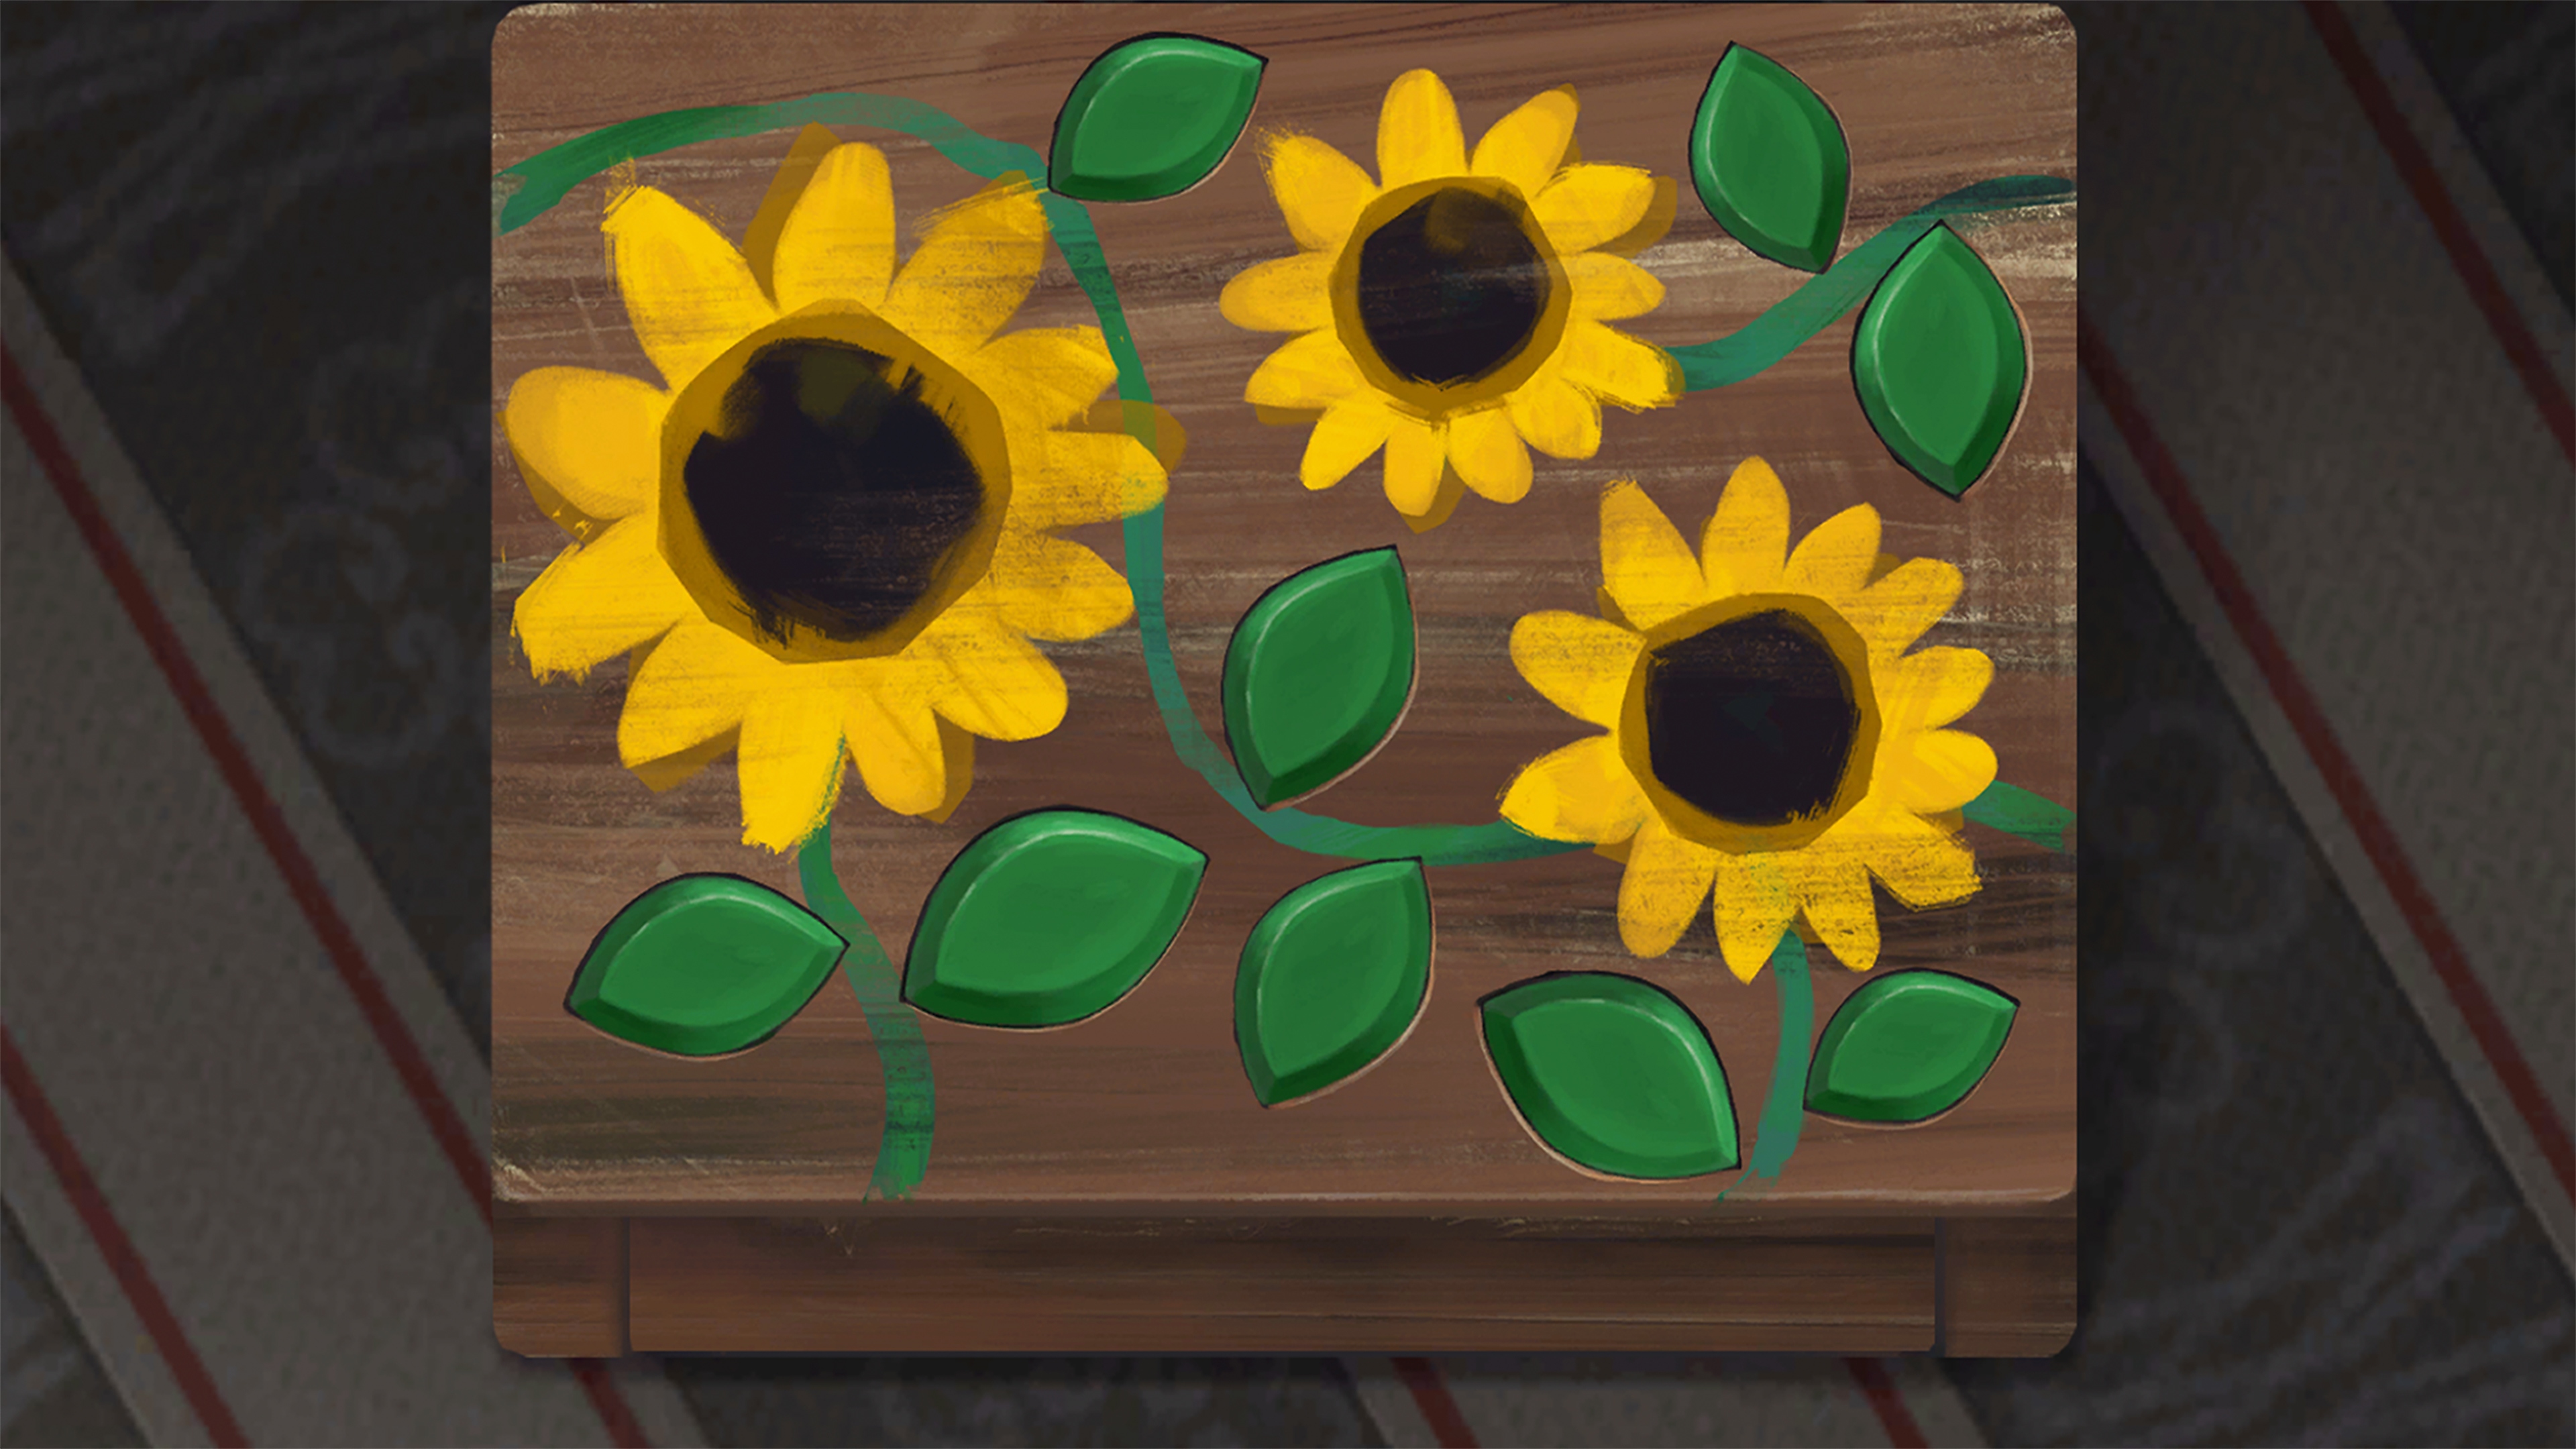 Behind the Frame: The Finest Scenery screenshot showing a painting of sunflowers